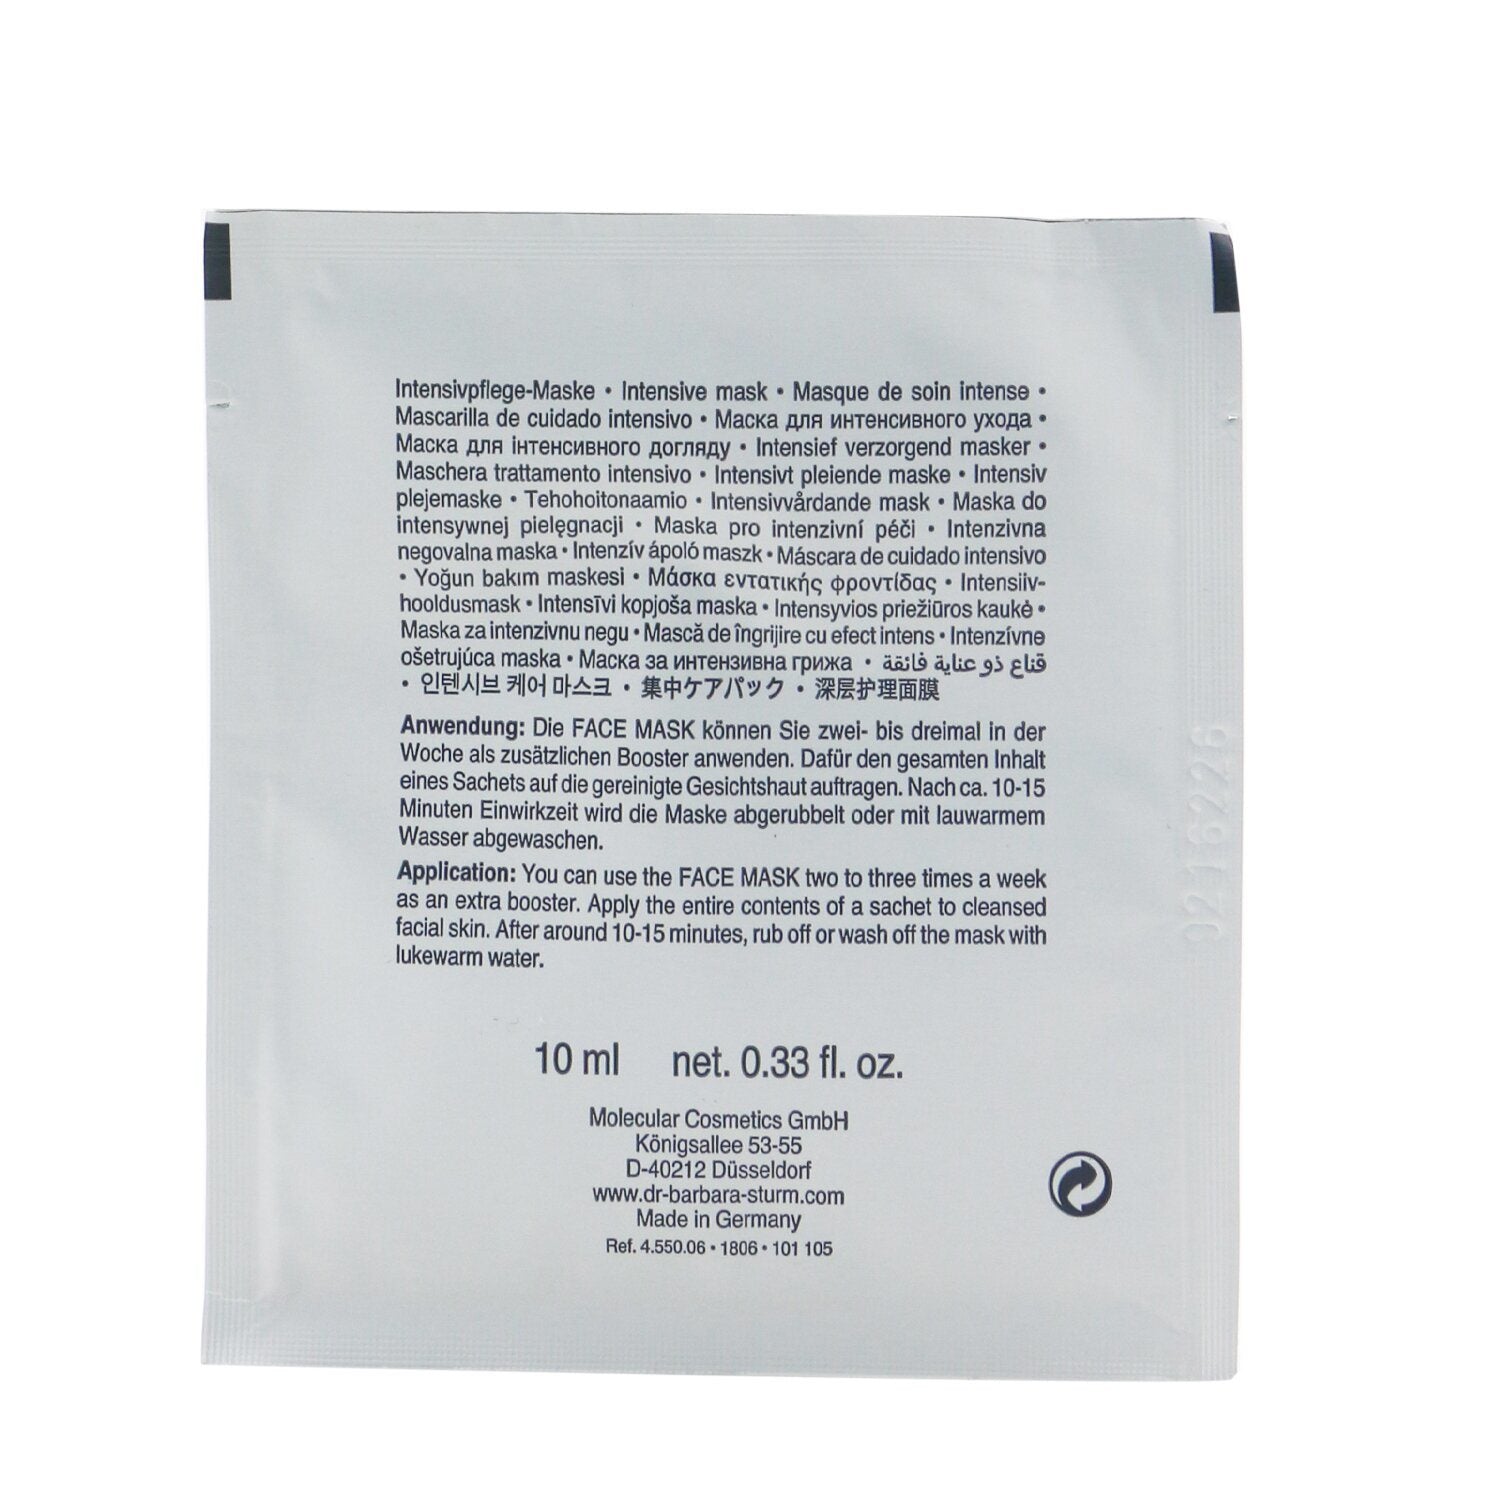 A package of DR. BARBARA STURM - Face Mask Sachet Box 33529/455006 7x10ml/0.33oz labeled "molecular cosmetics" on a white background.